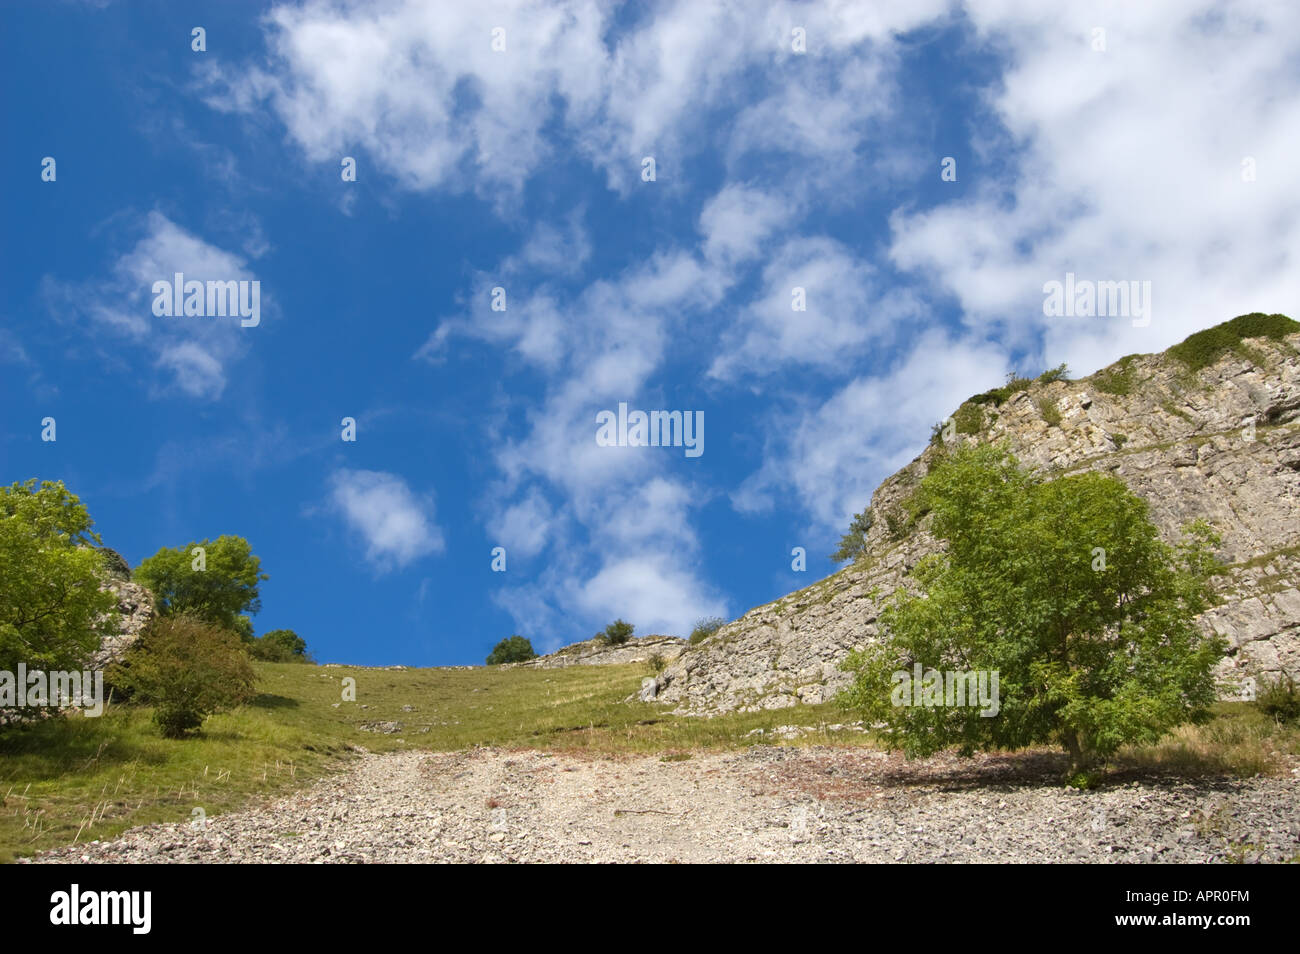 Scree slope and limestone cliffs in Lathkill Dale, Peak District, Derbyshire, England, UK Stock Photo